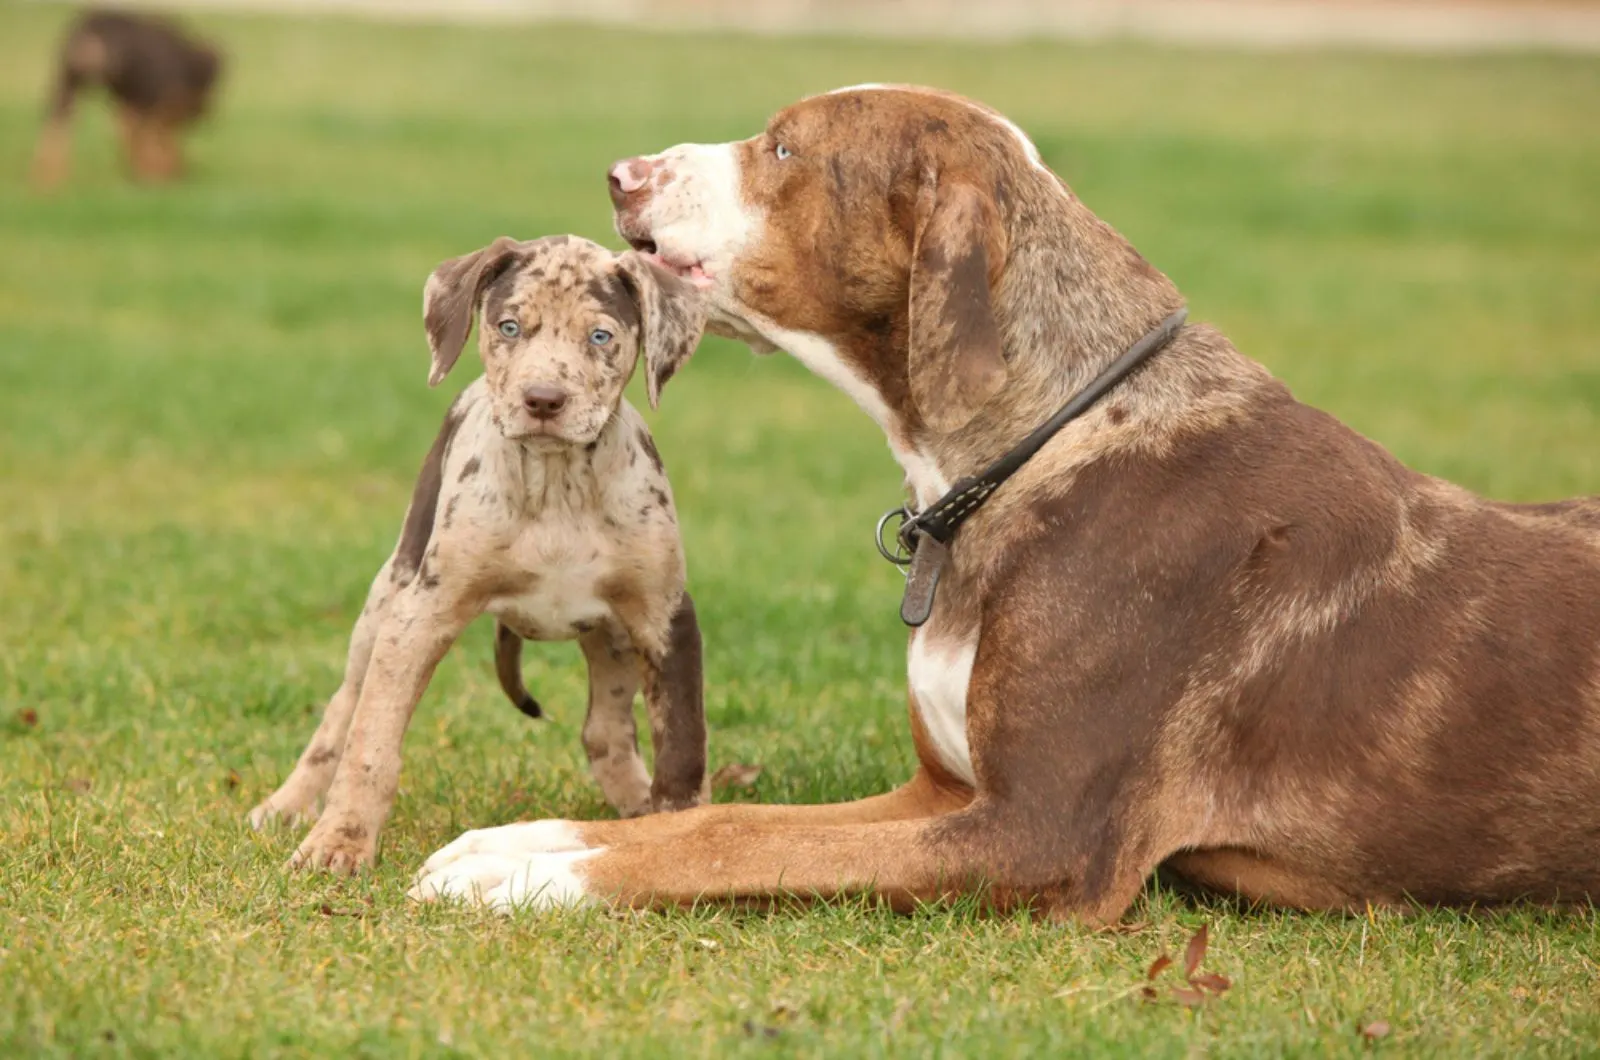 catahoula leopard puppy and his mother on the lawn